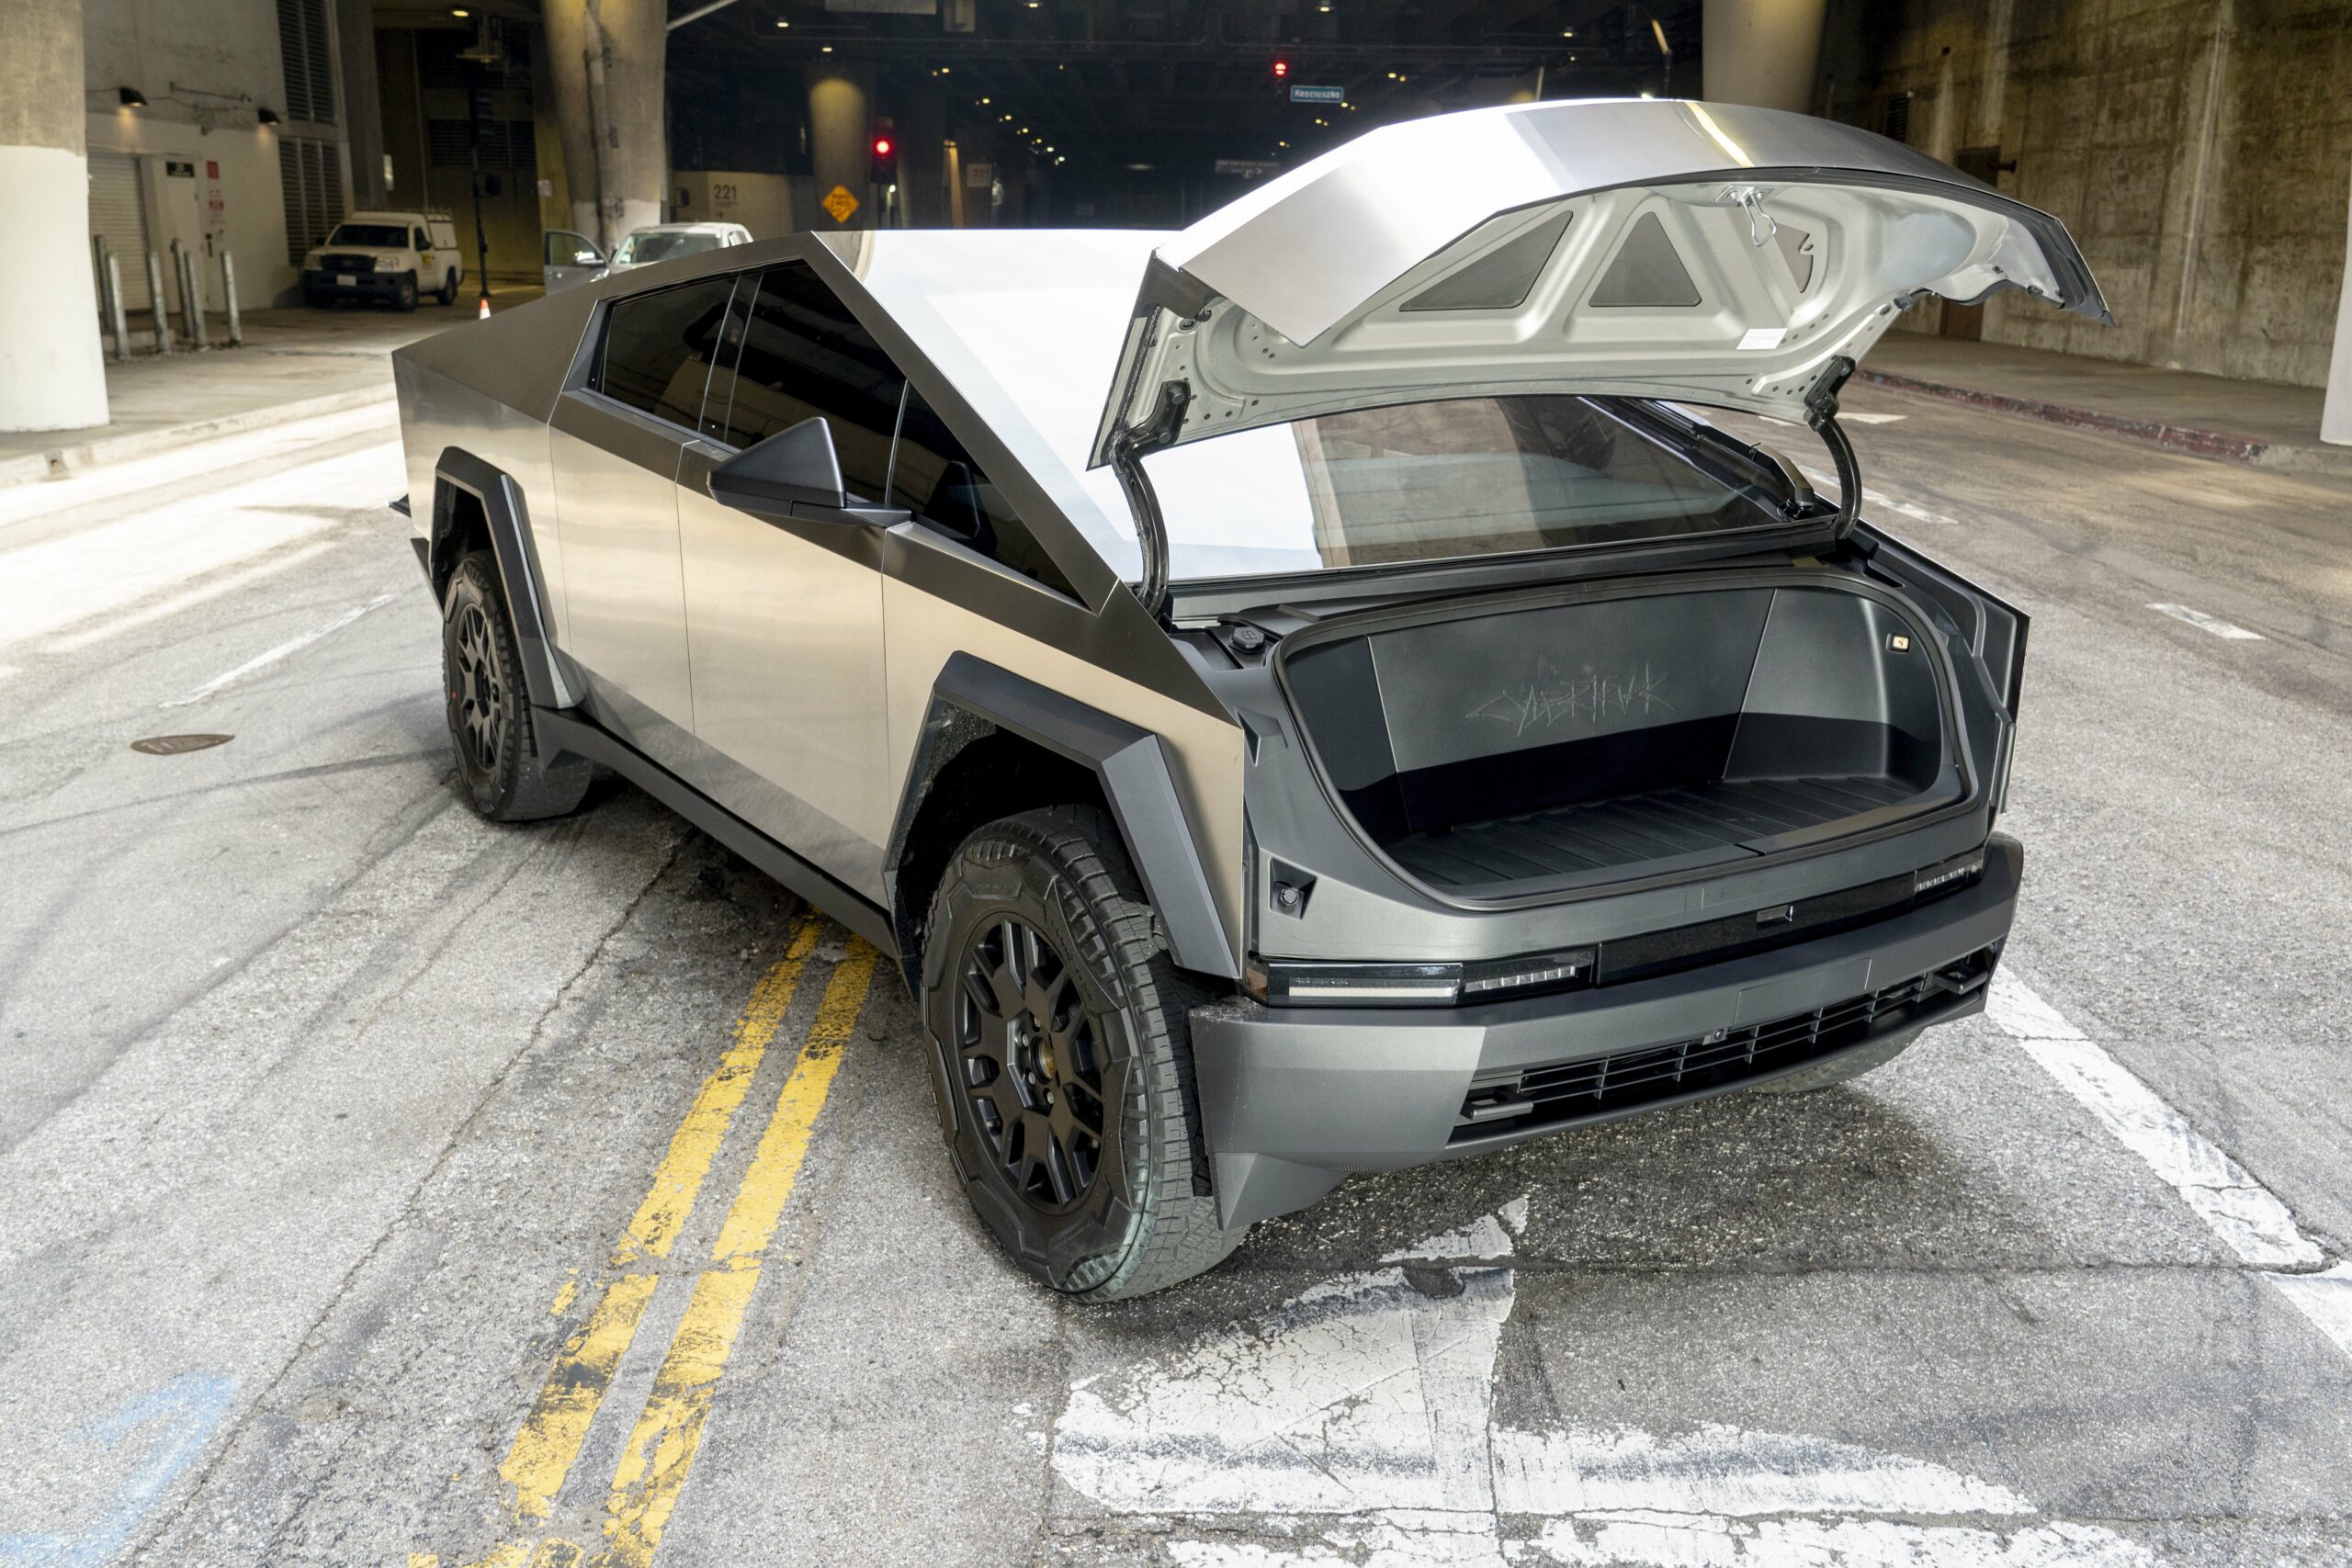 a Tesla Cybertruck with its frunk trunk or 